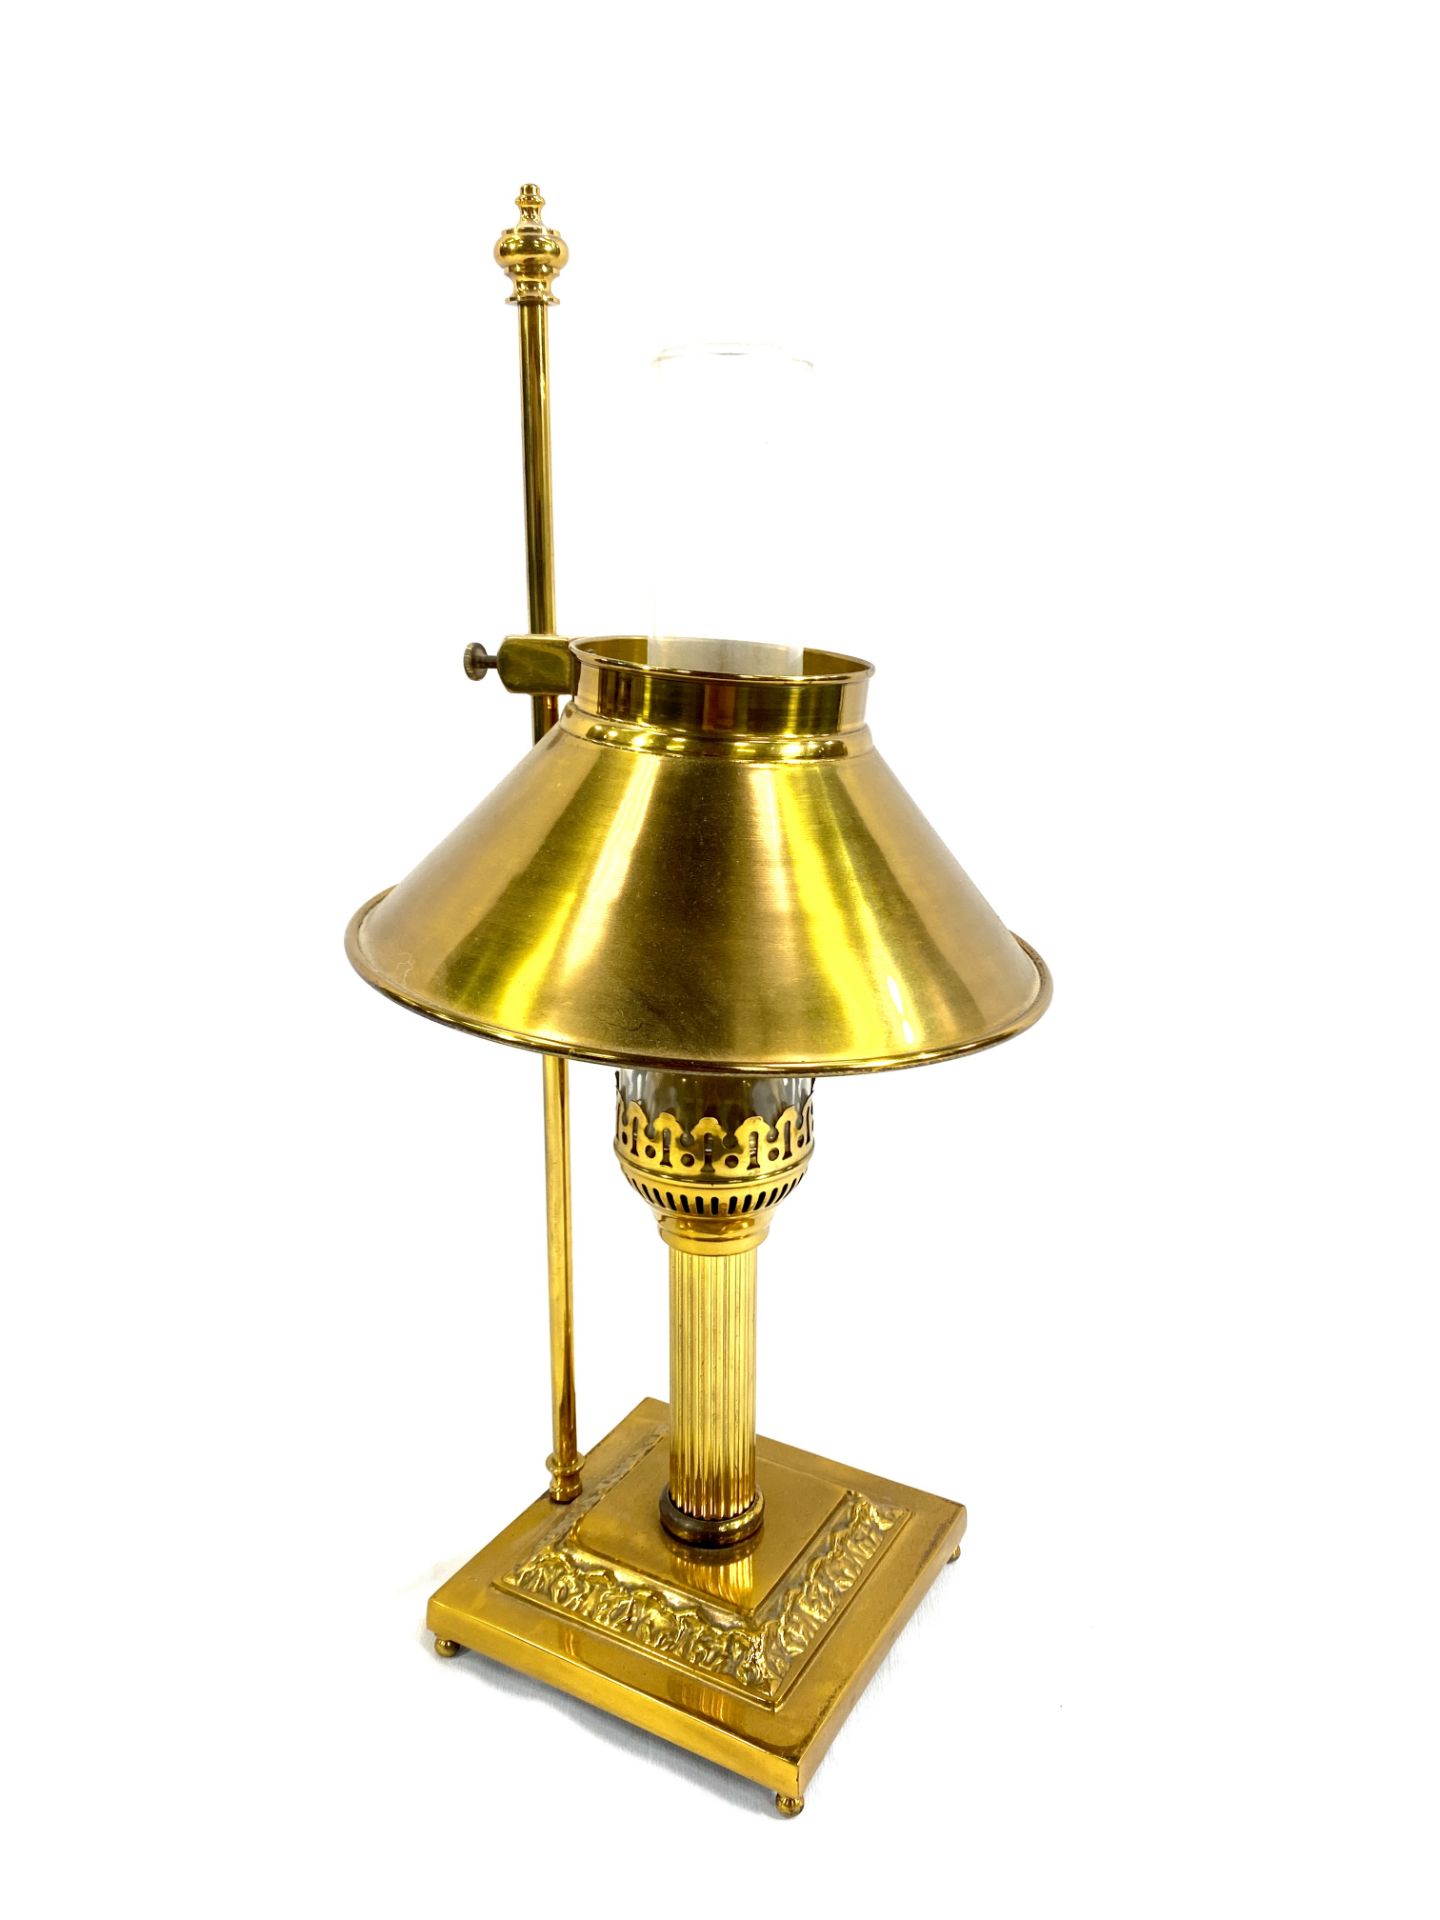 Brass table lamp in the style of a gas lamp - Bild 3 aus 3